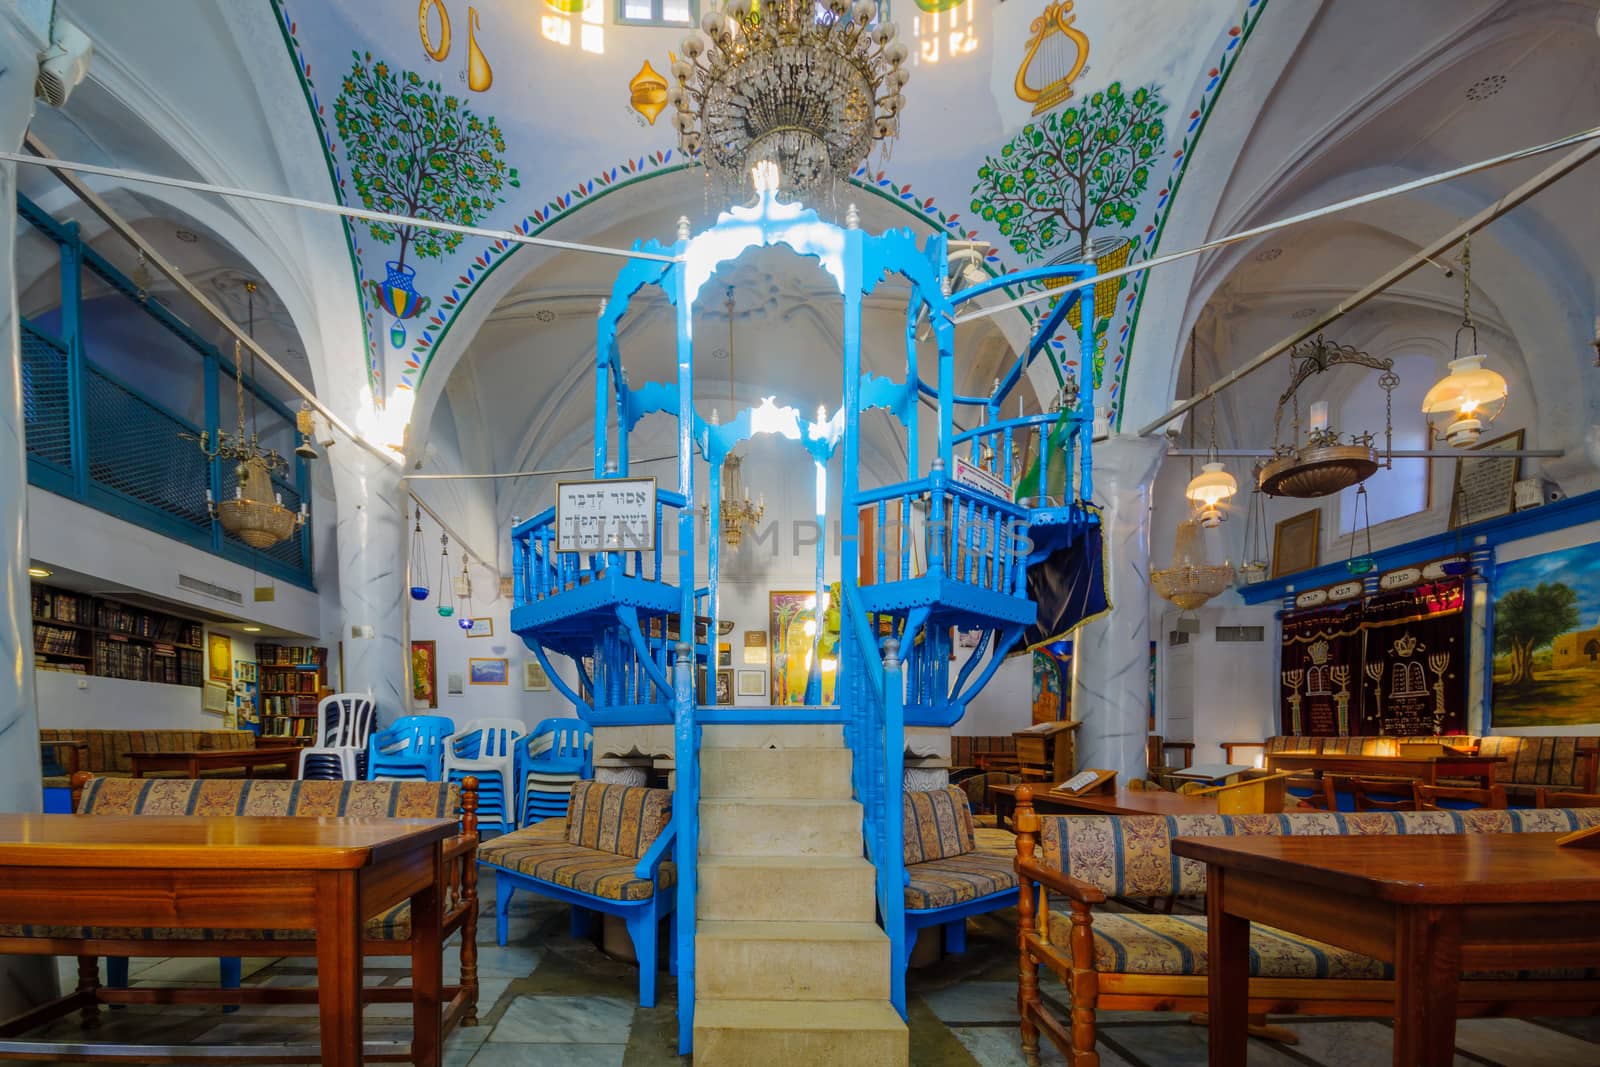 The Abuhav Synagogue, in the Jewish quarter, Safed (Tzfat) by RnDmS